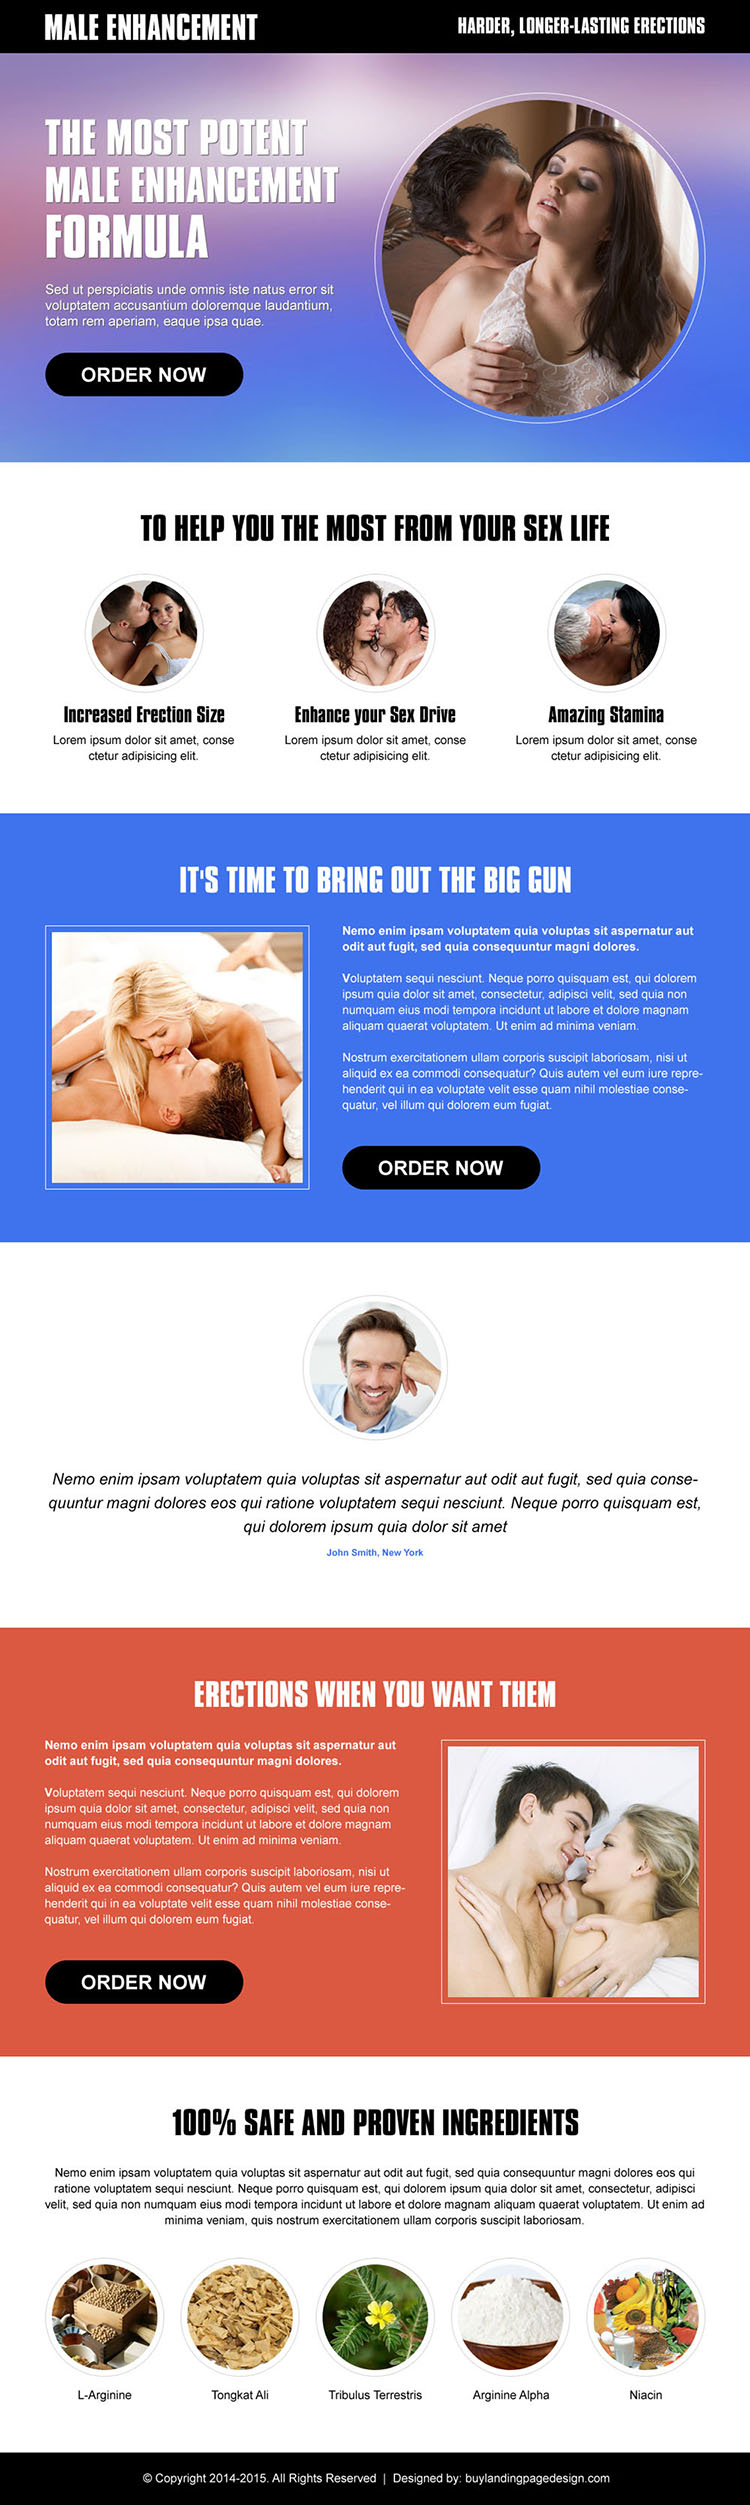 clean and converting male enhancement responsive landing page design to boost your male enhancement formula sales